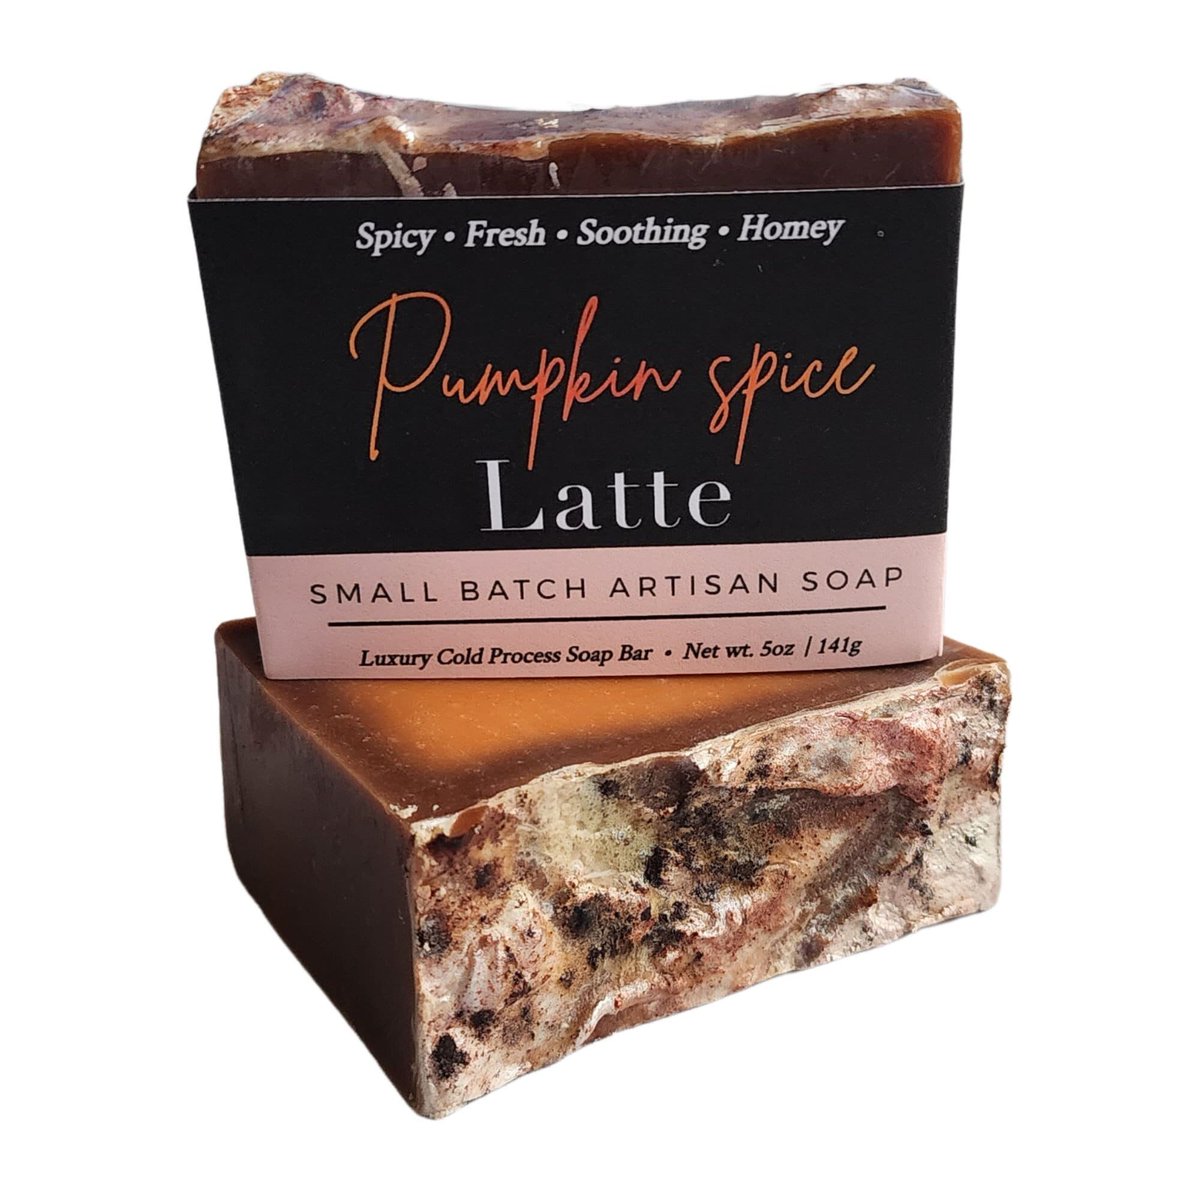 Pumpkin Spice Latte Soap Natural Soap Gift Vegan Soap Cold Process Soap Handmade Spice Soap Fall Soap Christmas Soap Gift Soap Favors tuppu.net/3cdc7385 #selfcare #Christmasgifts #shopsmall #soap #gifts #vegan #Soapgift #handmadesoap #HandmadeSoap